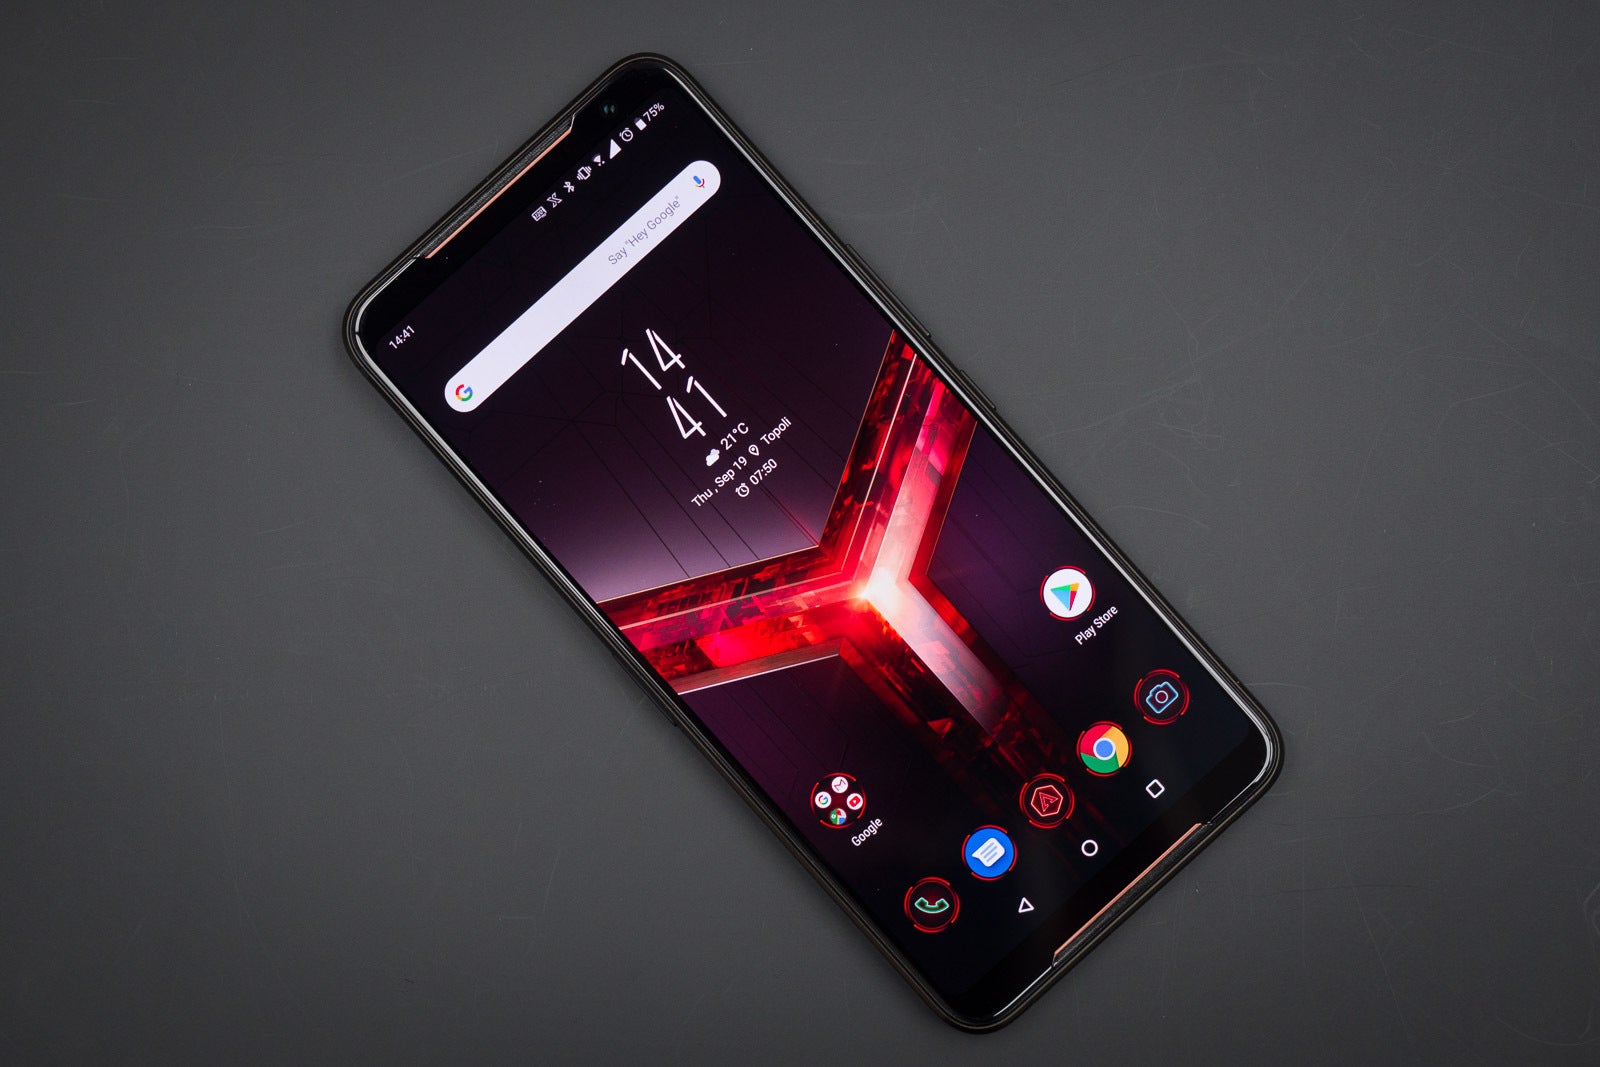 The Asus ROG Phone II is one of the few currently existing phones to offer a 120Hz display. - Xiaomi phone with 120Hz display might join the high refresh rate club